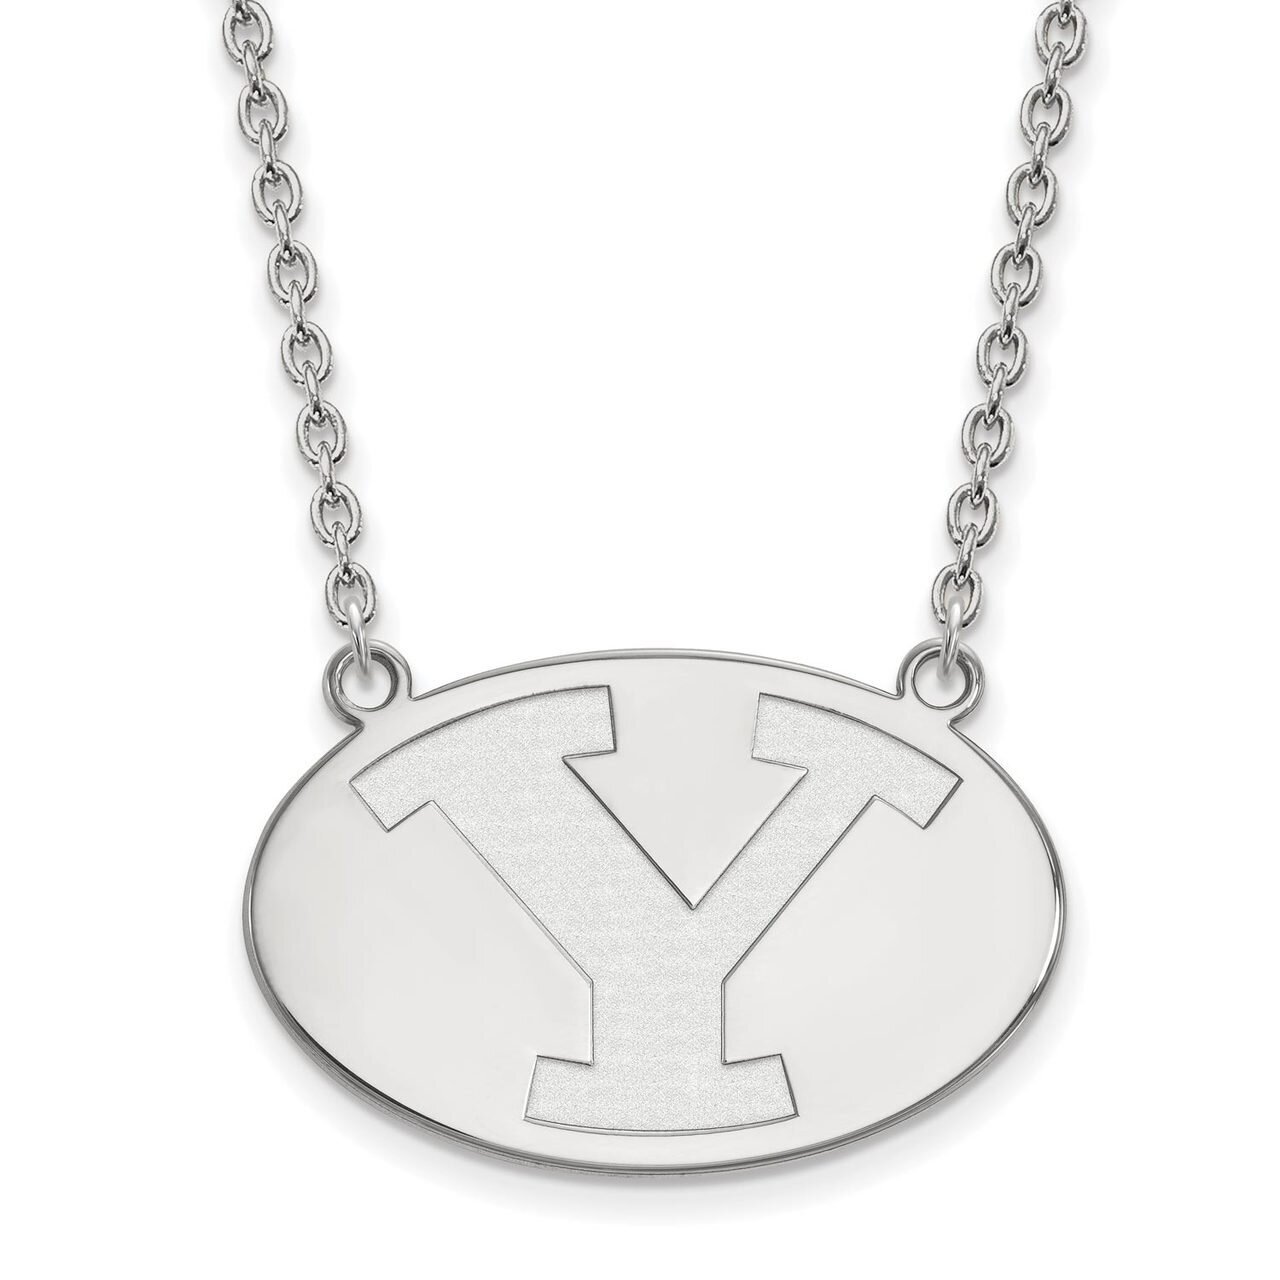 Brigham Young University Large Pendant with Chain Necklace Sterling Silver SS010BYU-18